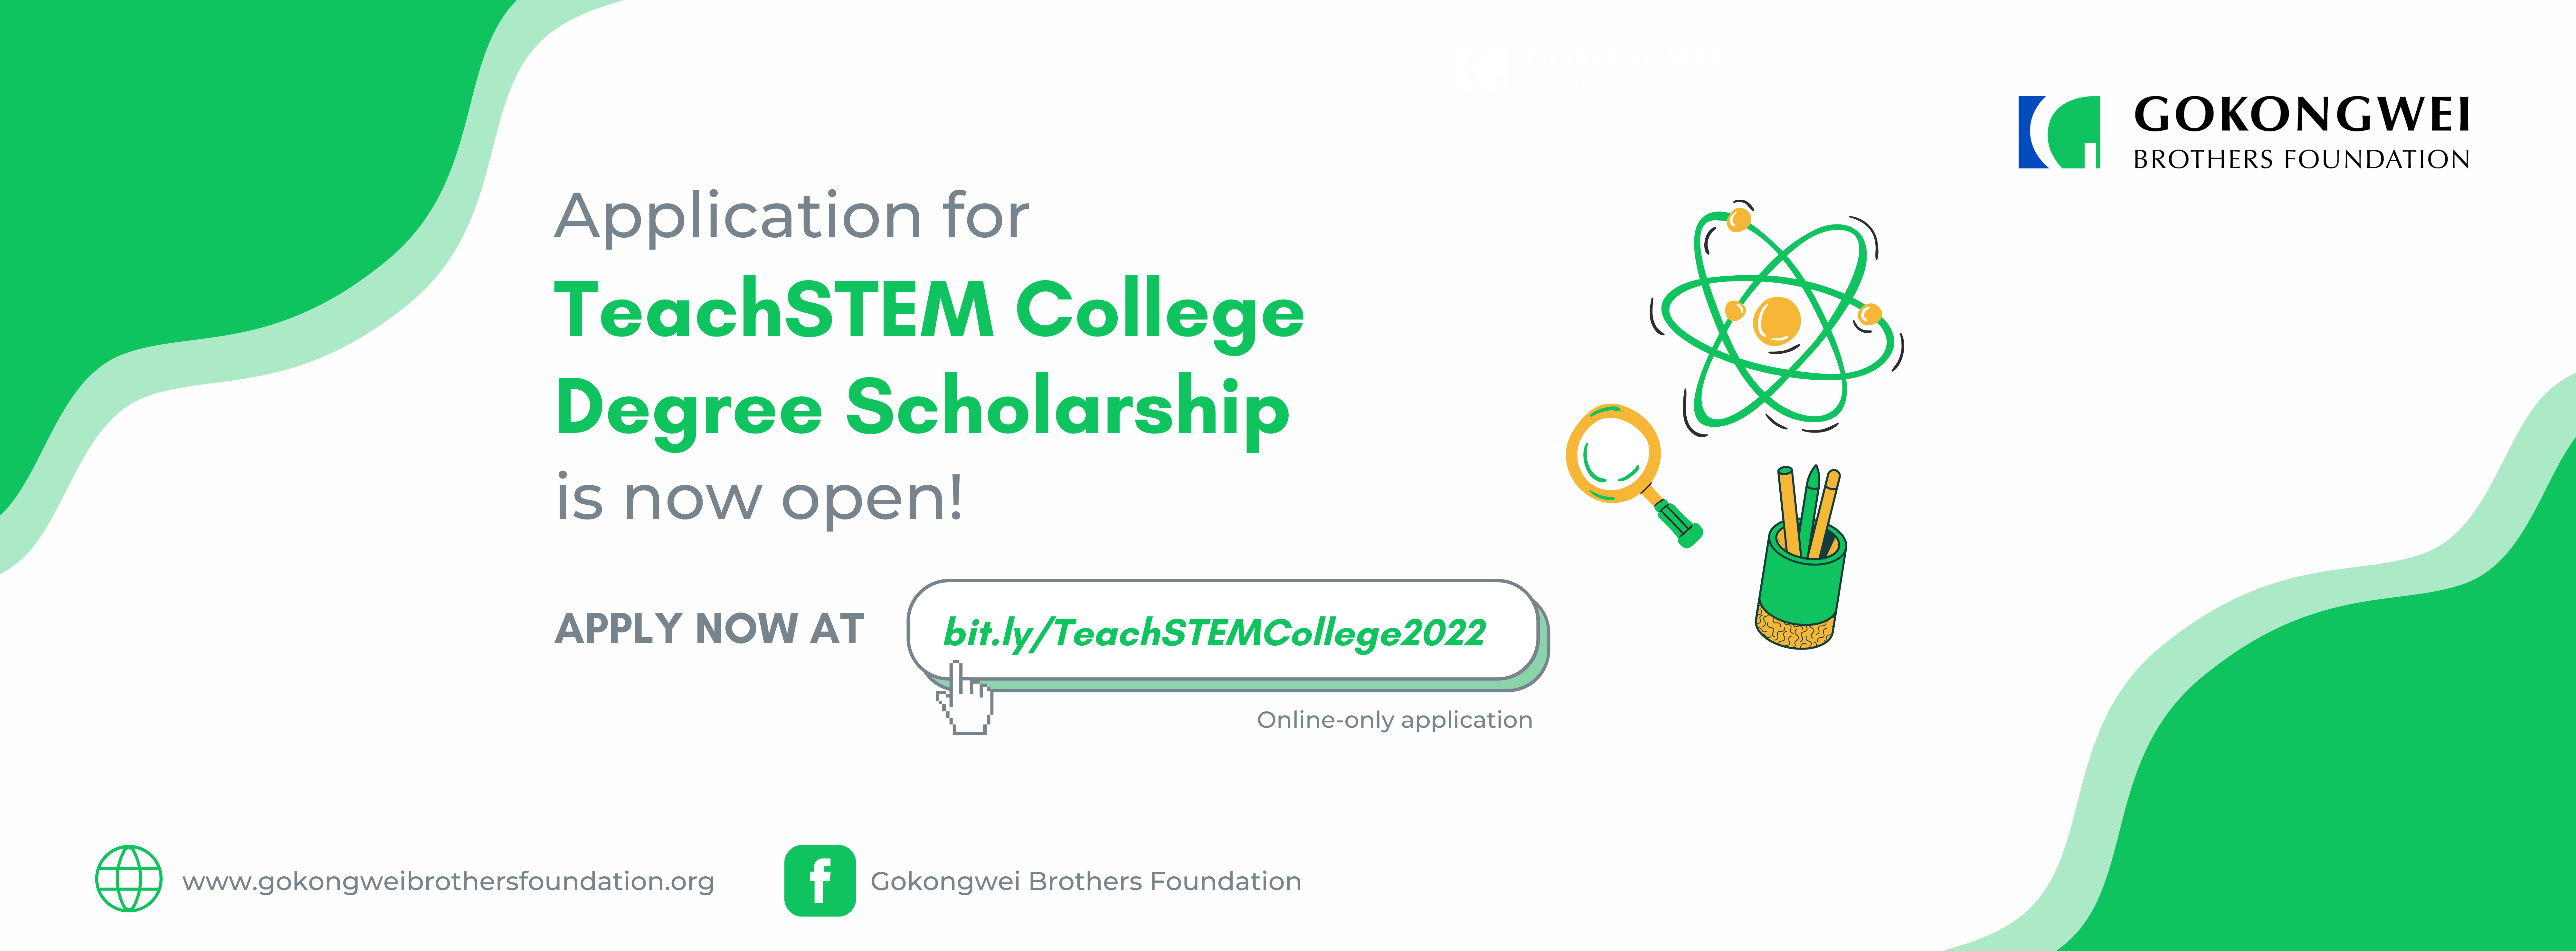 Application for TeachSTEM College Degree Scholarship is now open